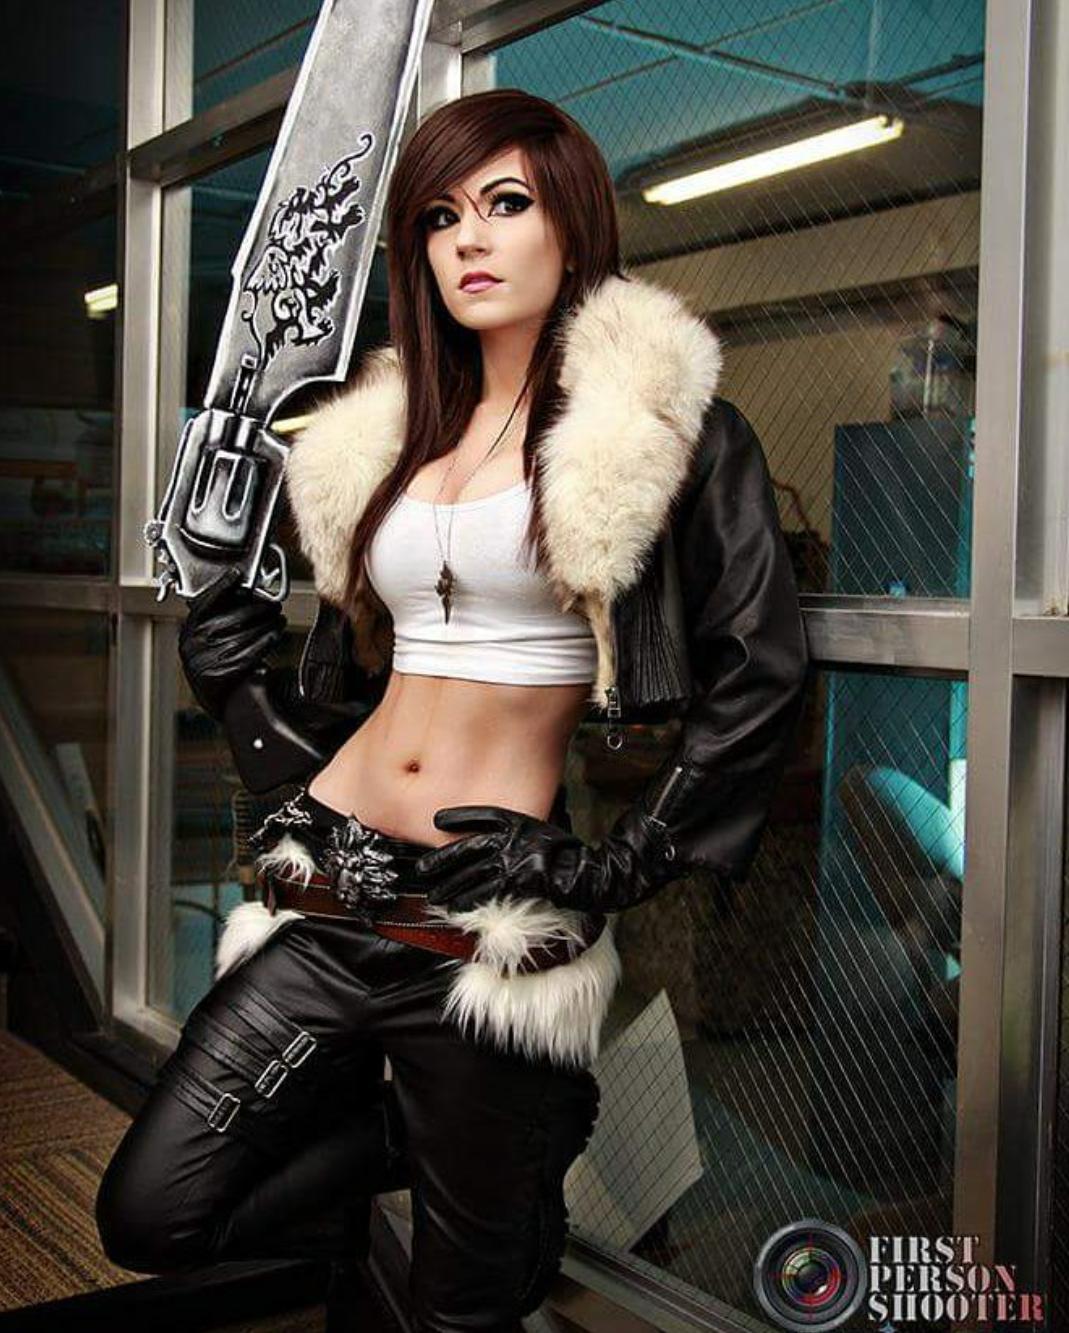 squall leonhart cosplay female - First Person Siiooter